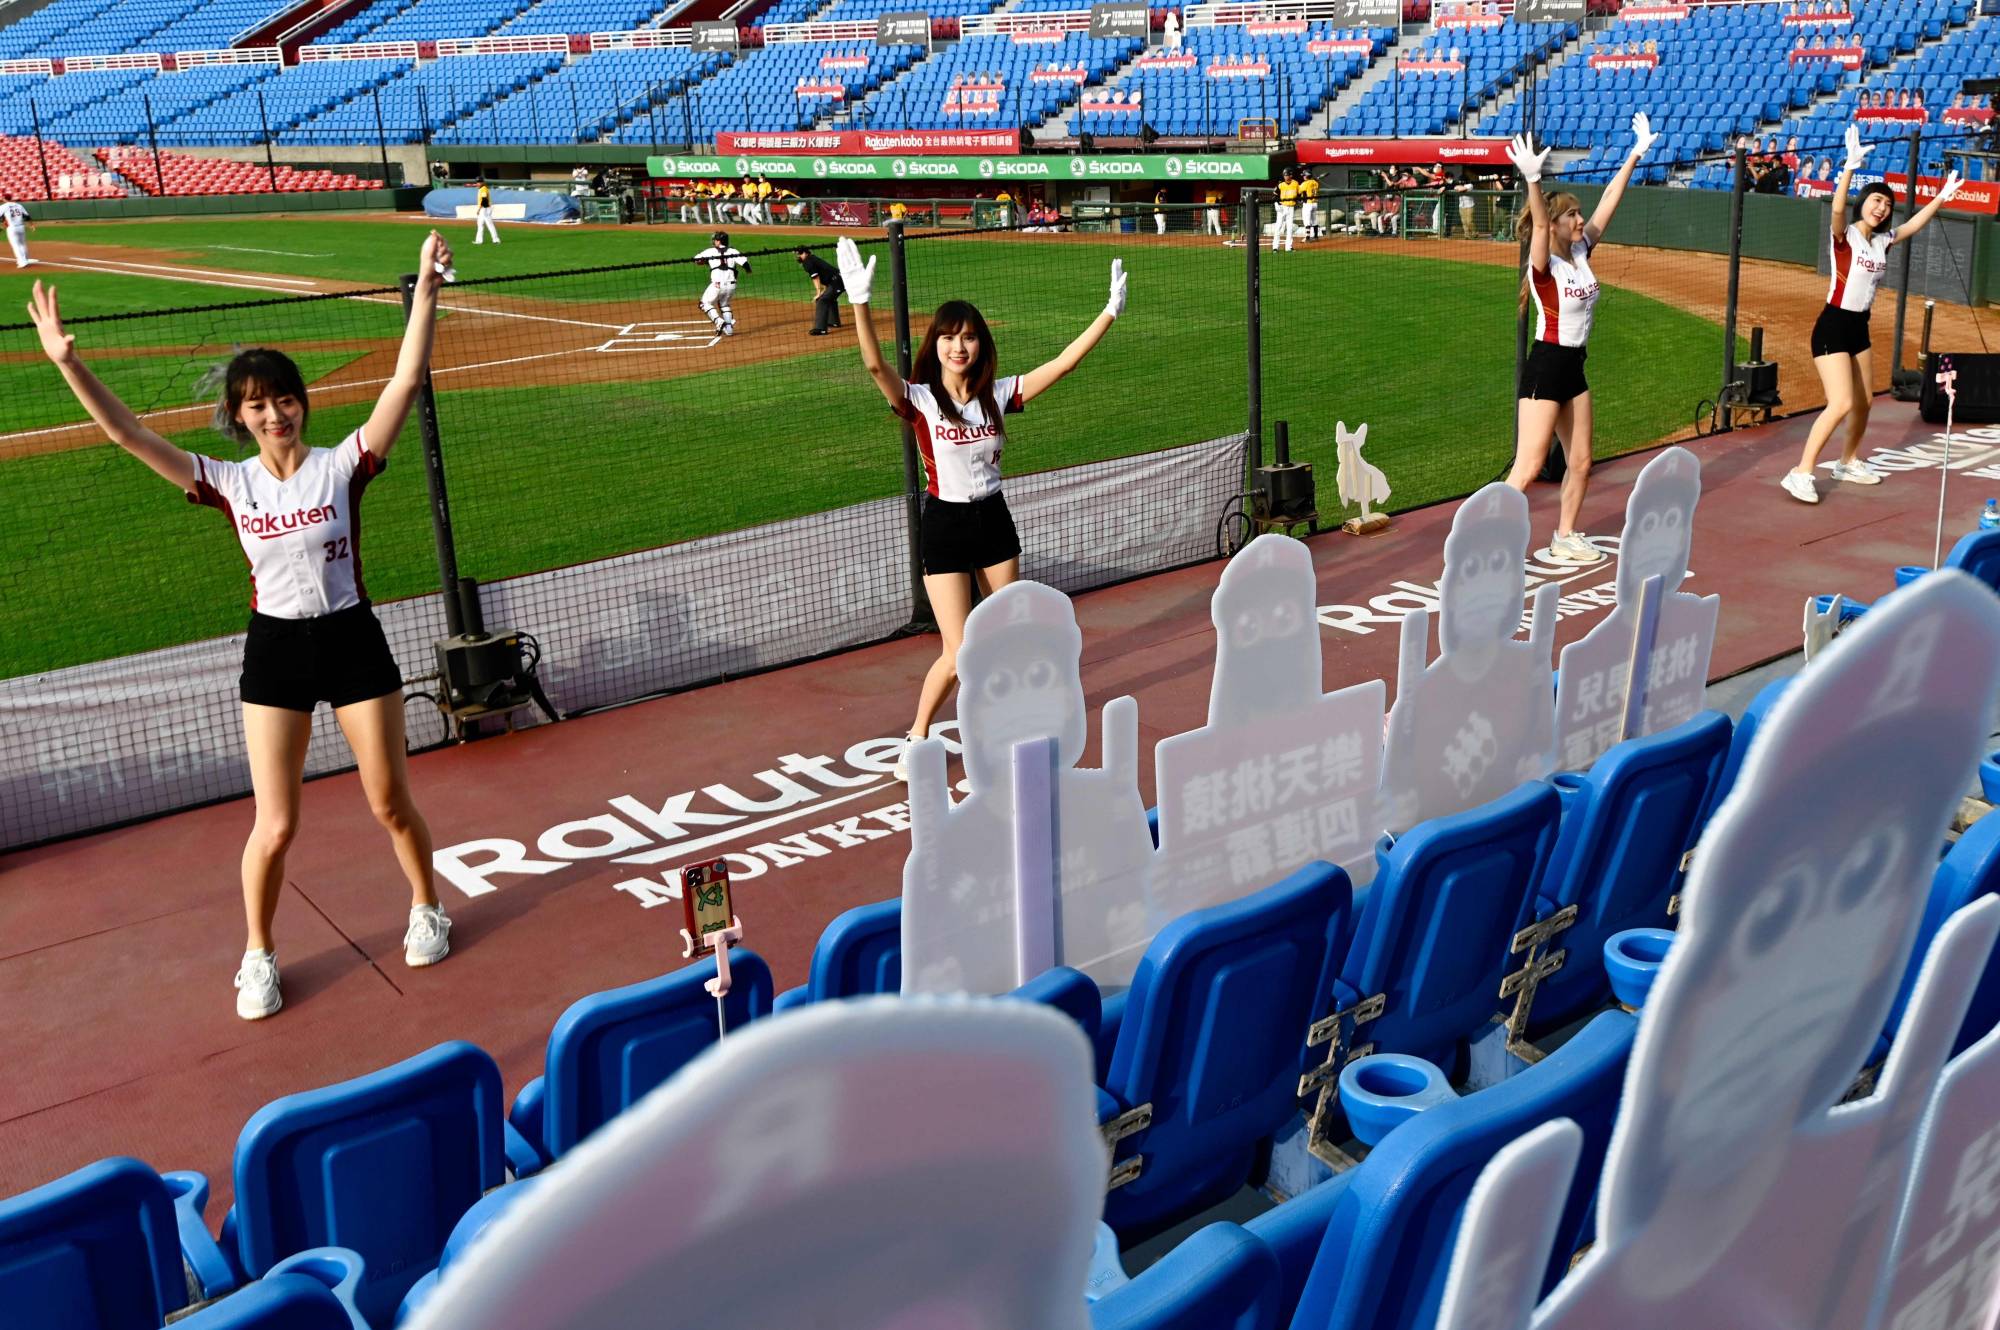 Taiwan to allow baseball fans back into stands this week